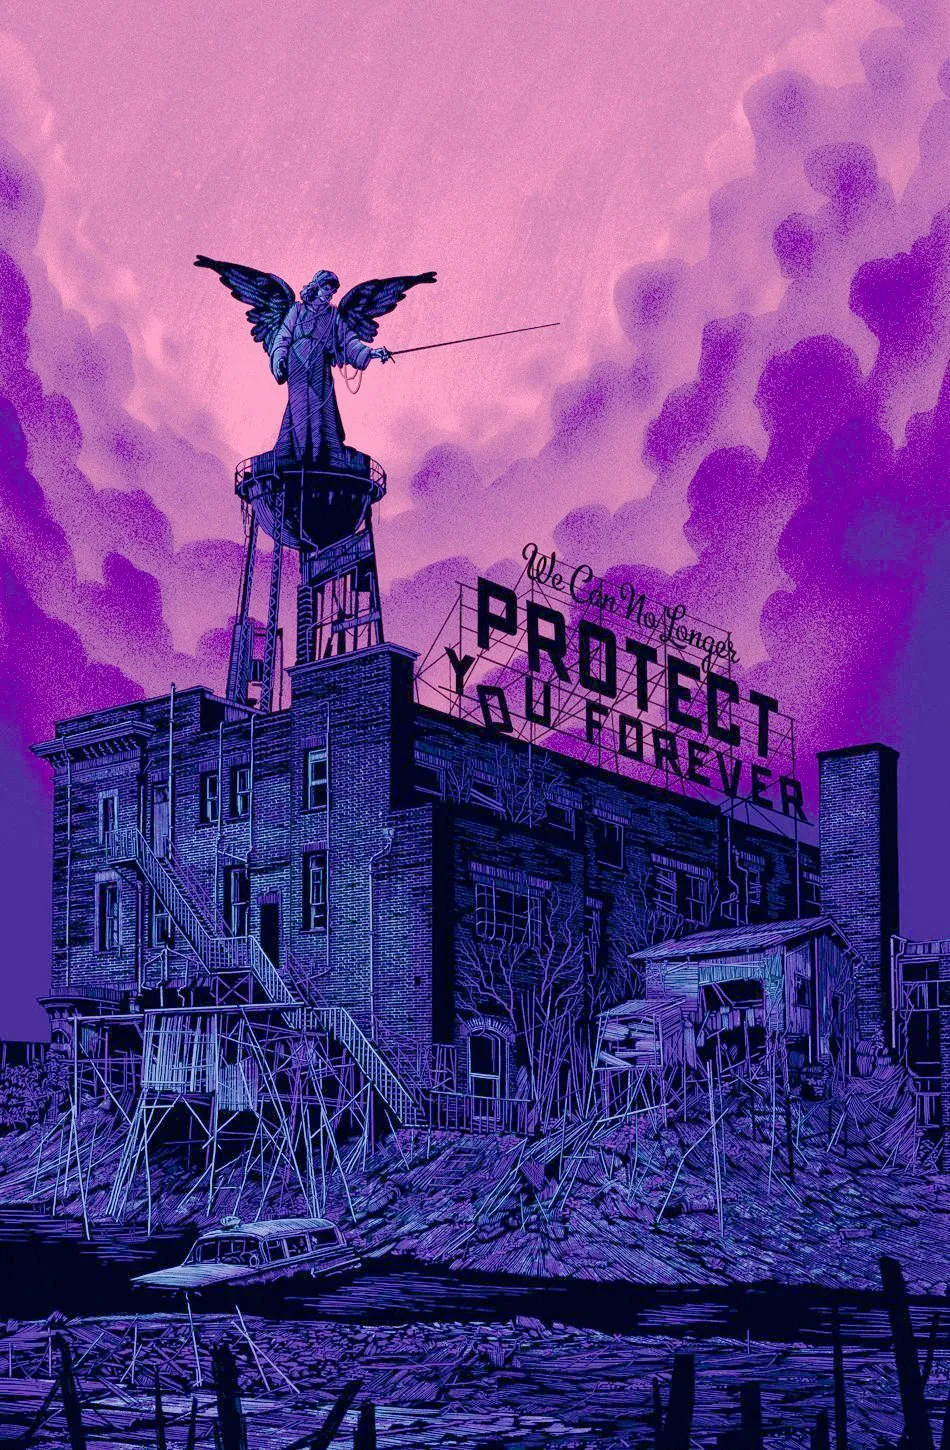 Daniel Danger, We can no longer protect you forever, 2014, sérigraphie.